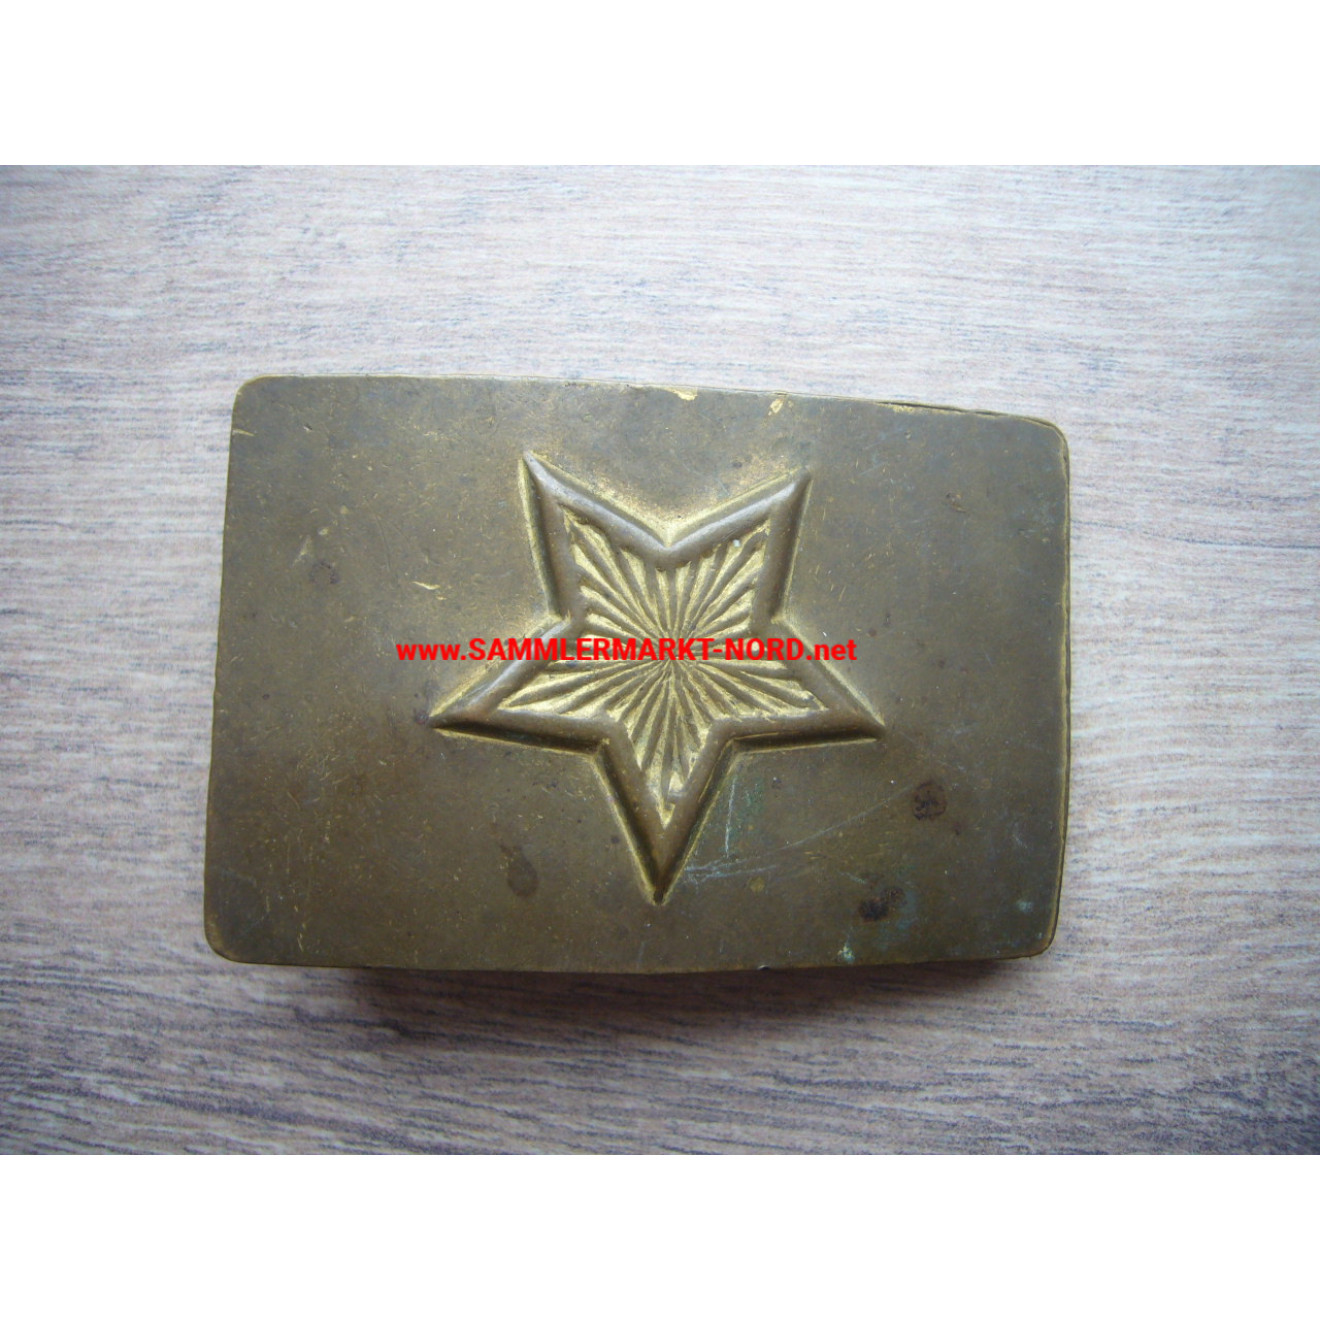 Russia / Soviet Union - Belt buckle with star